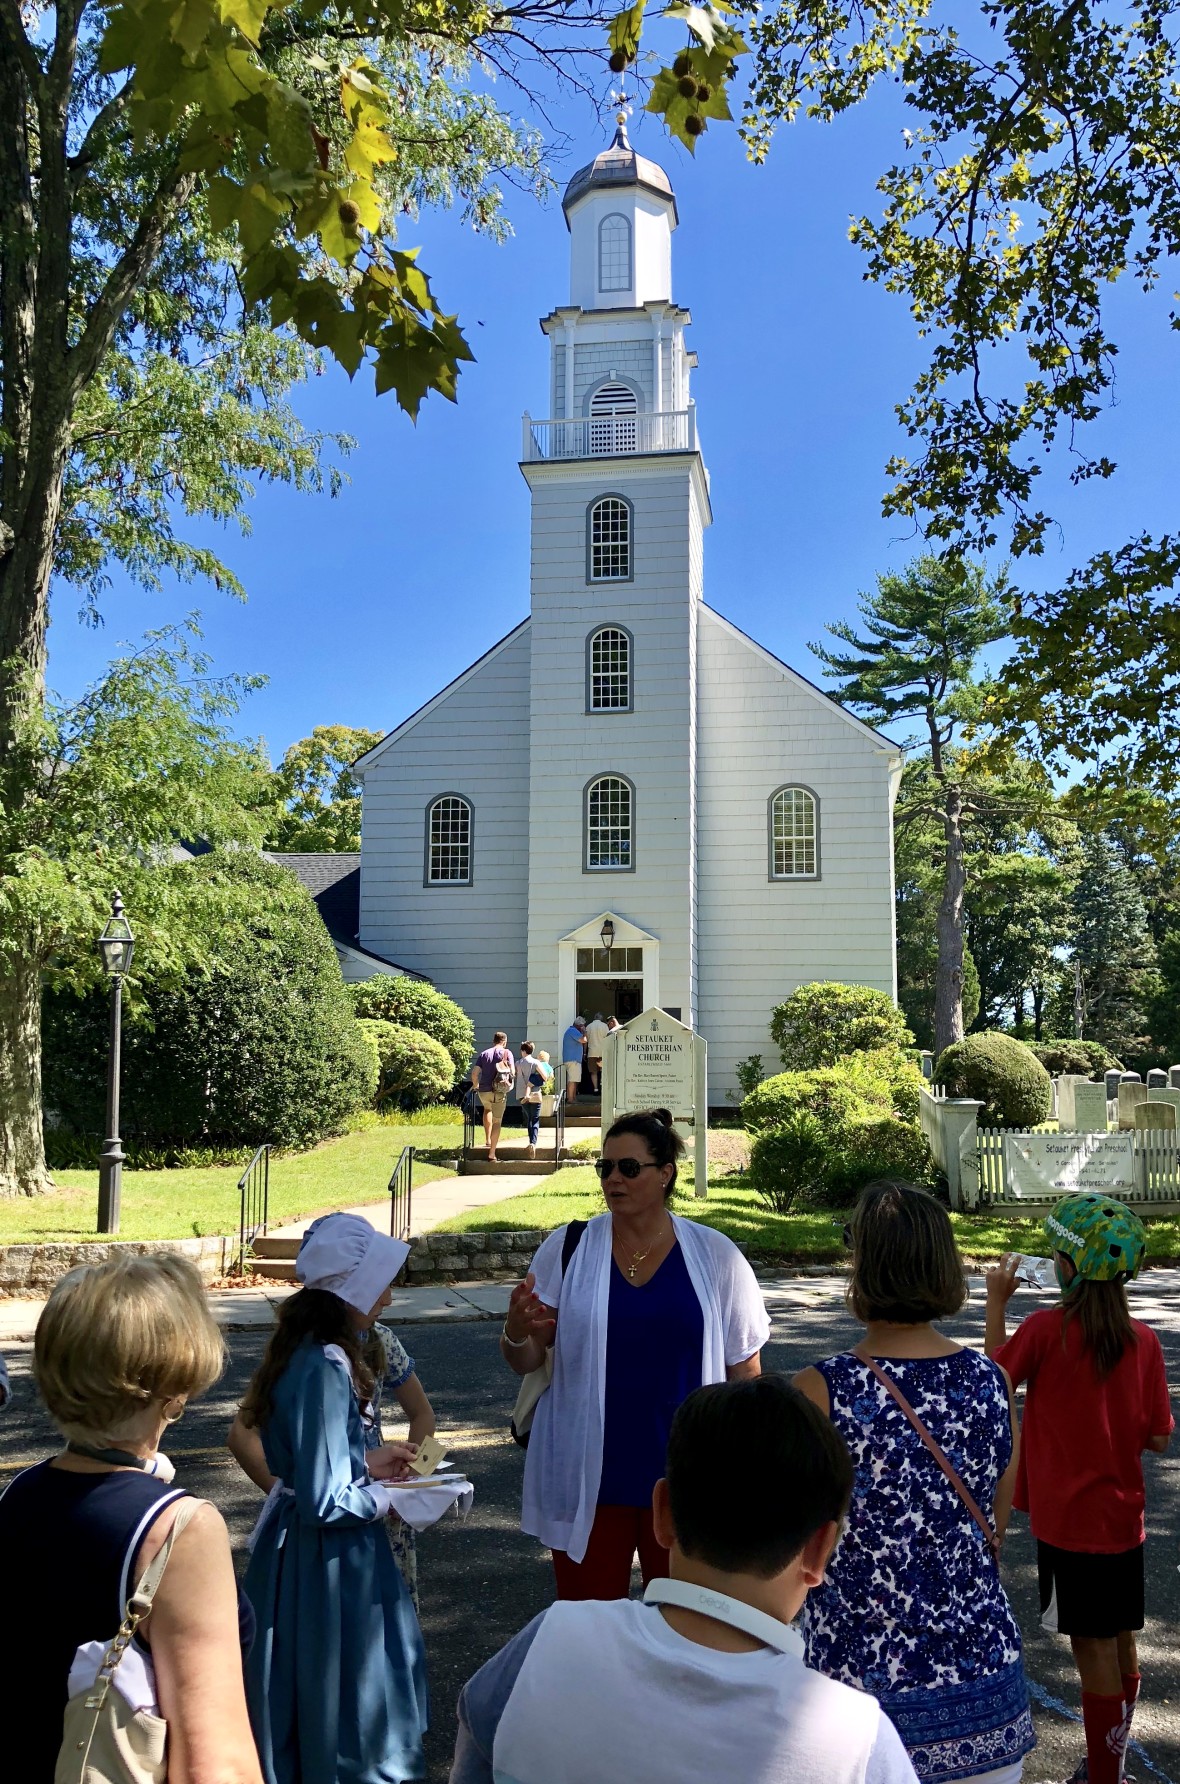 One of the Tri-Spy Tours in front of the Setauket Presbyterian Church